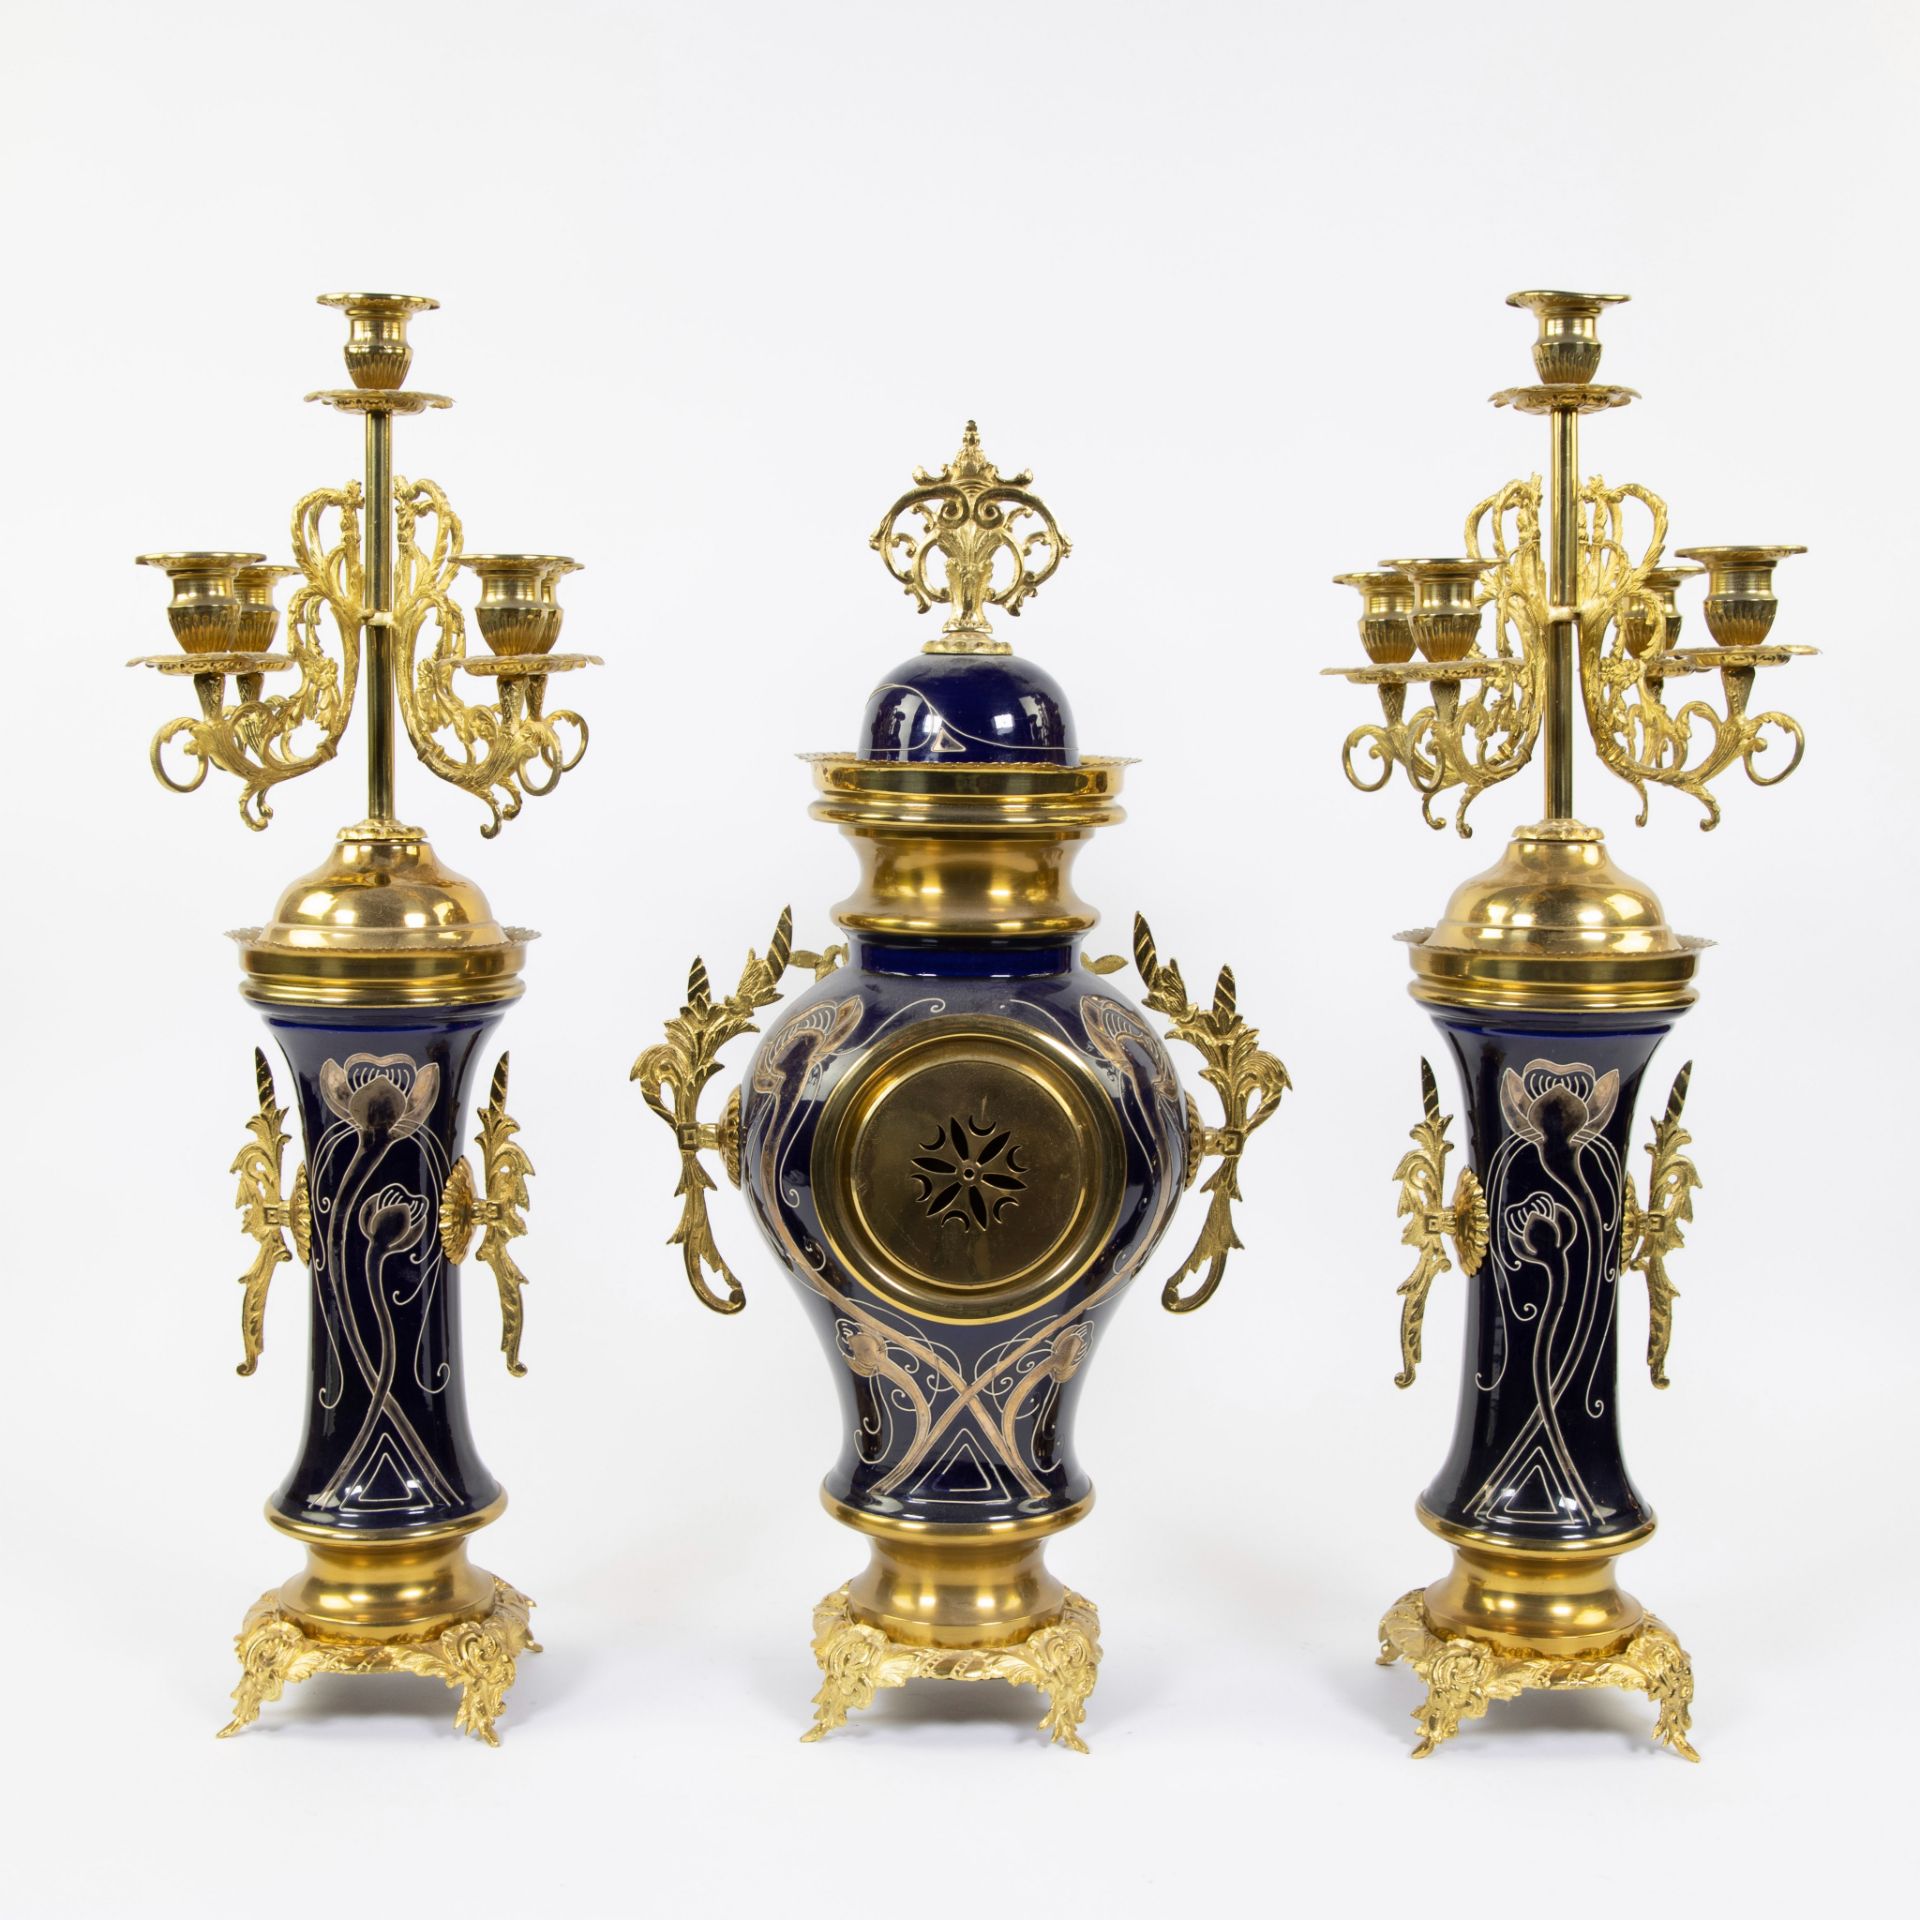 Three piece faience garnish decorated with stylized whiplash motifs and gilt brass, candlesticks wit - Image 3 of 4